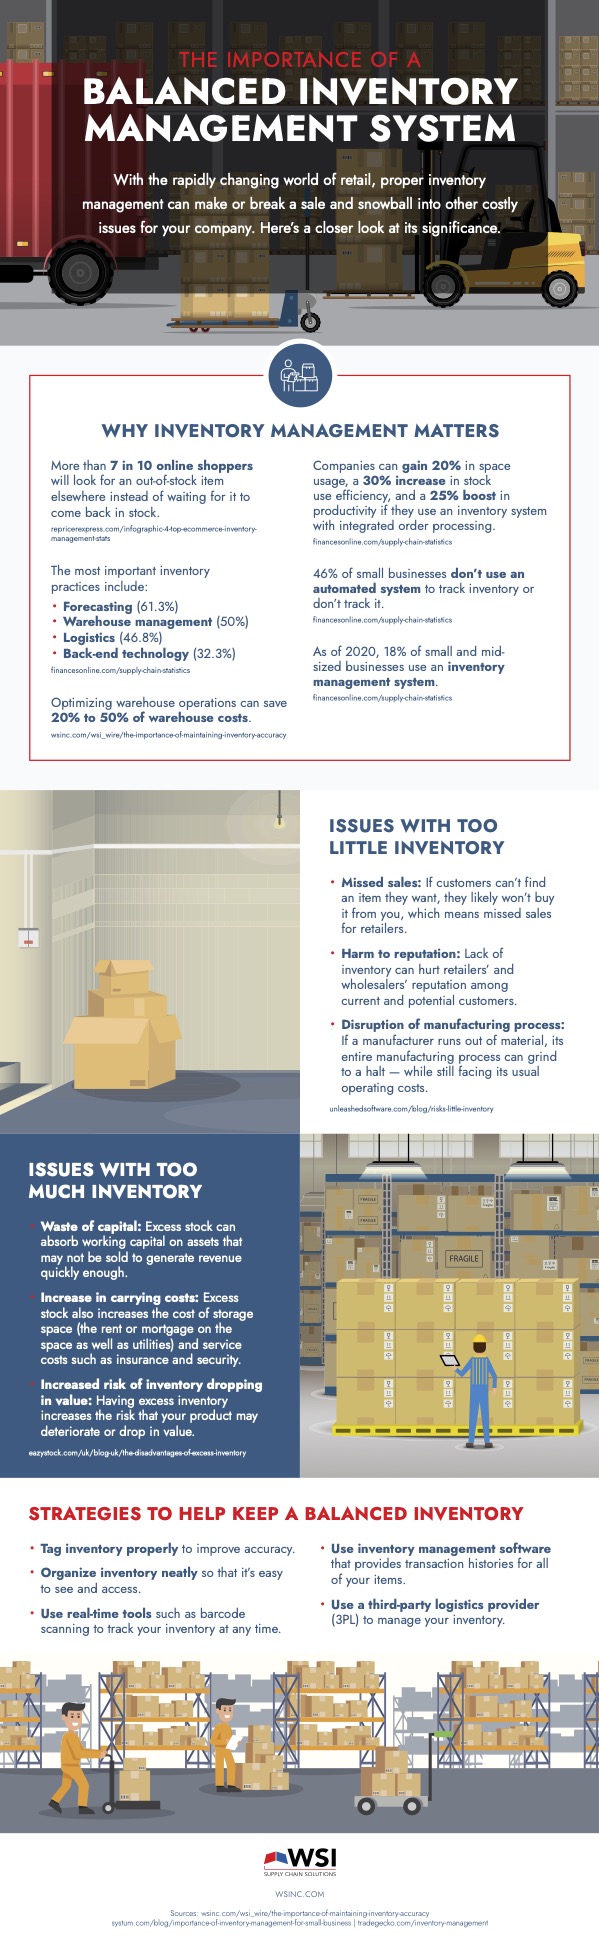 WSI Balanced Inventory Management System; infographic courtesy of WSI.